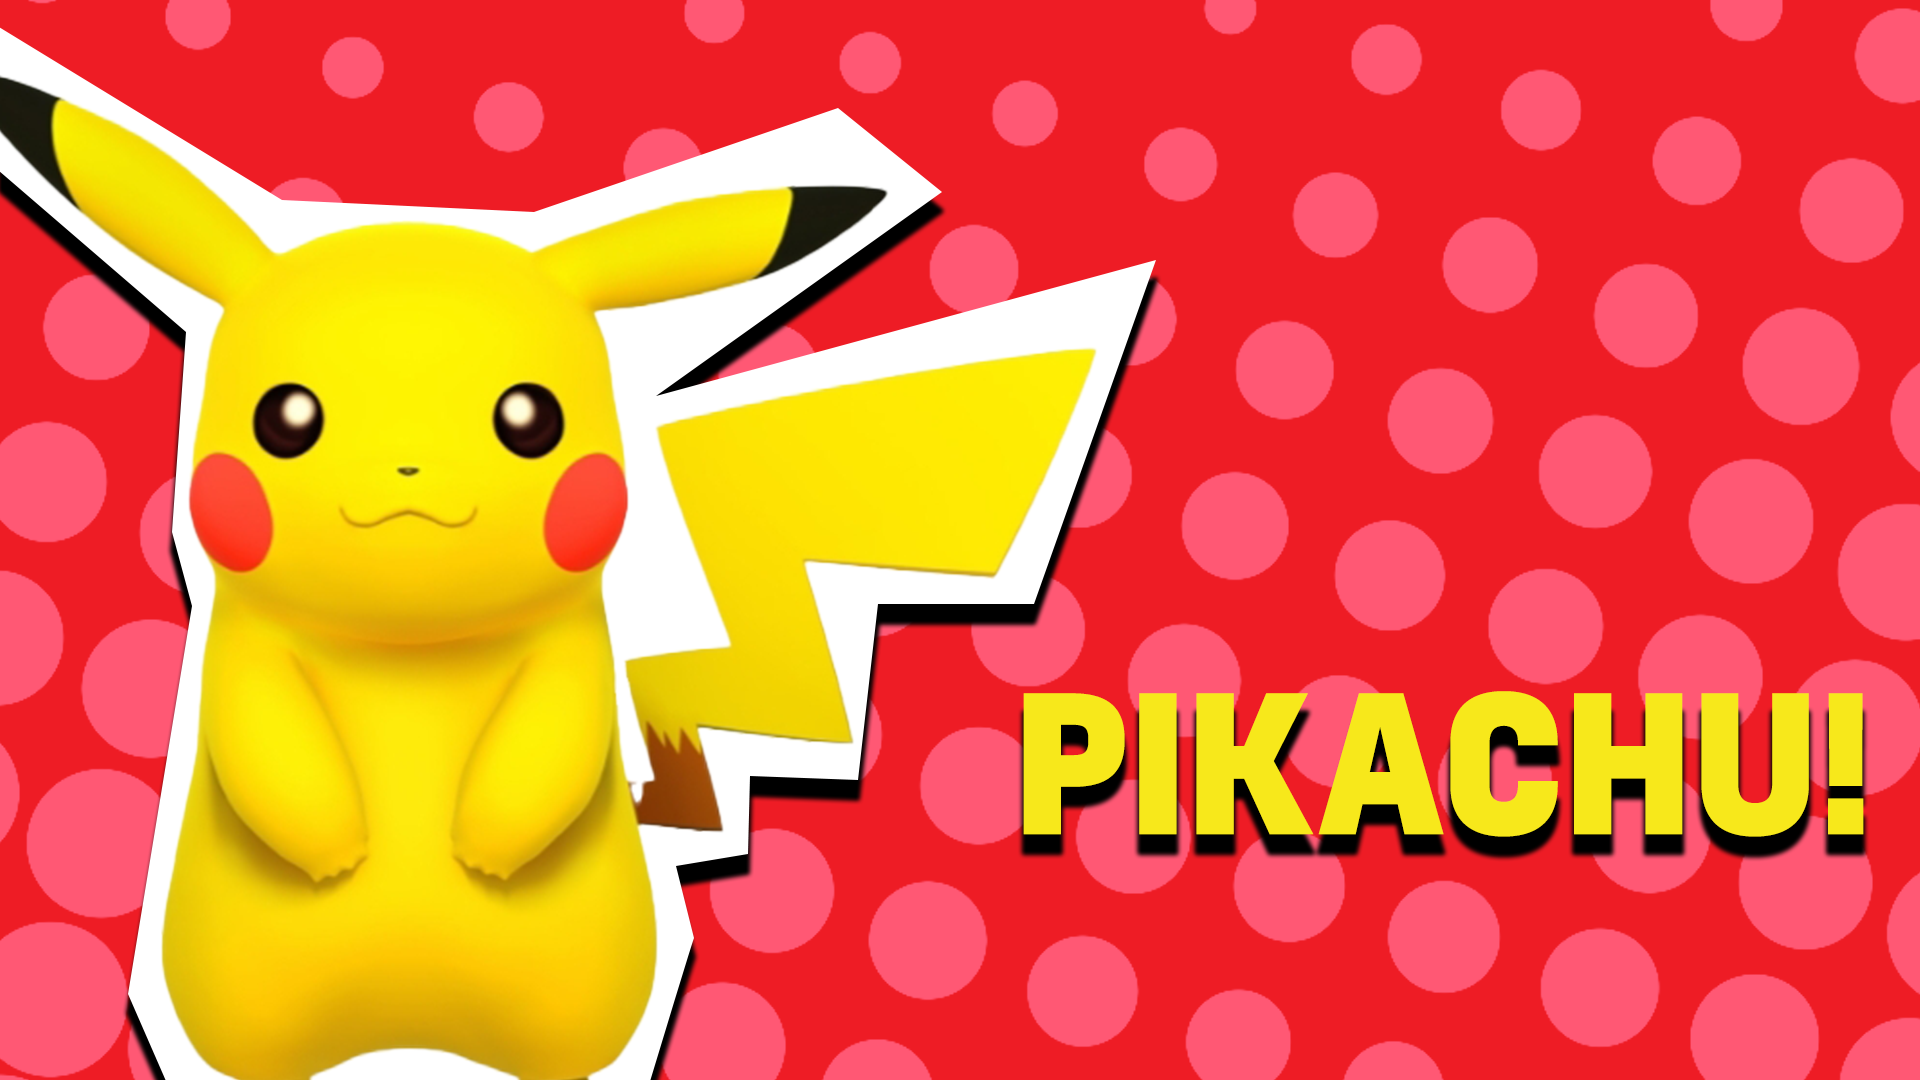 You're not a Mario OR a Donkey Kong: you're a Pikachu! You're fun, cute, and you prefer battling other Pokémon to collecting coins and points!